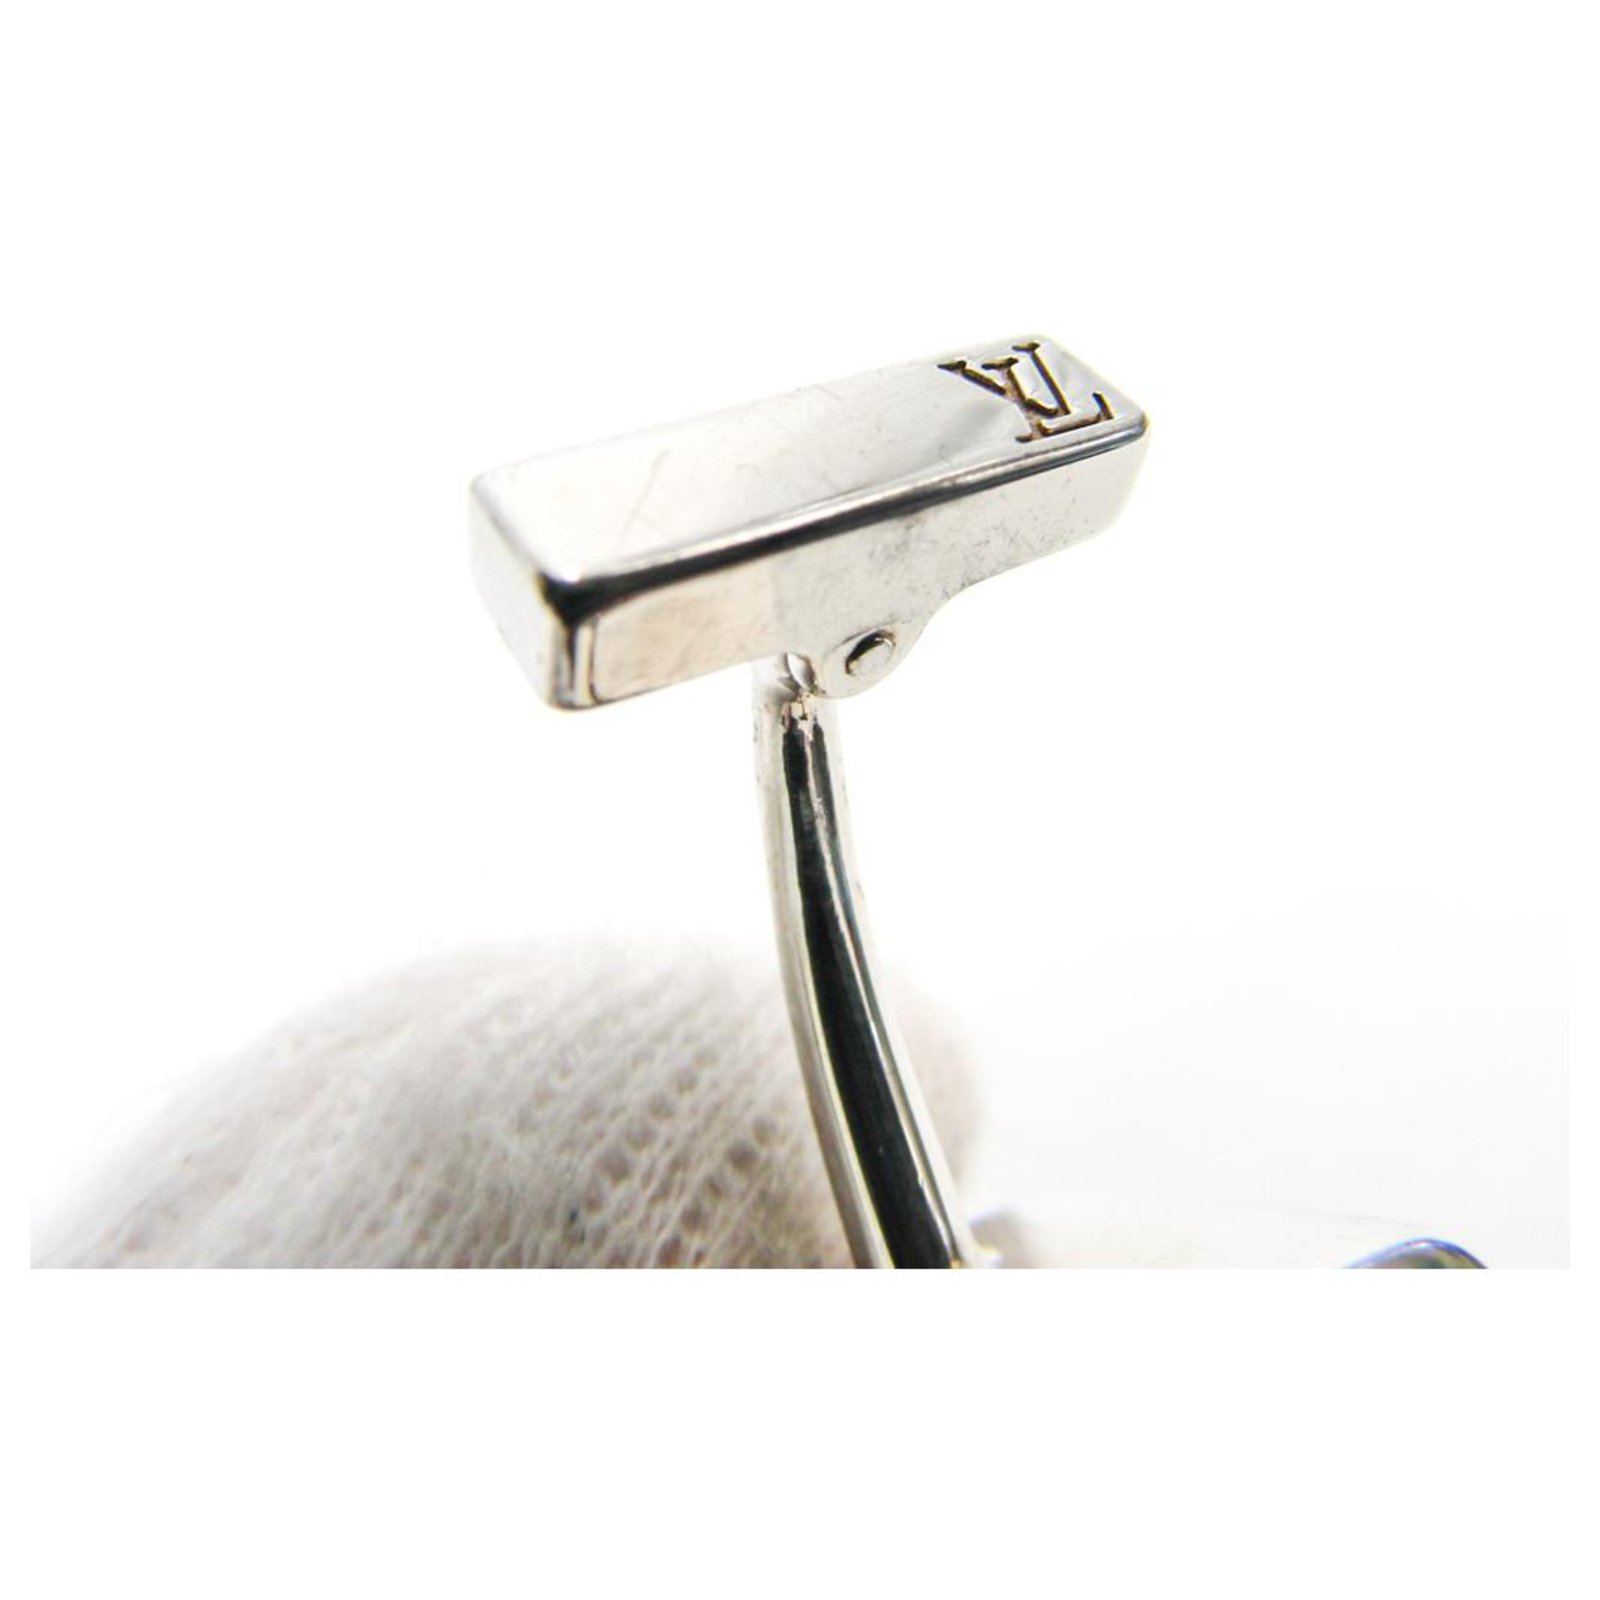 Louis Vuitton Sterling Silver Lock and Key Cufflinks